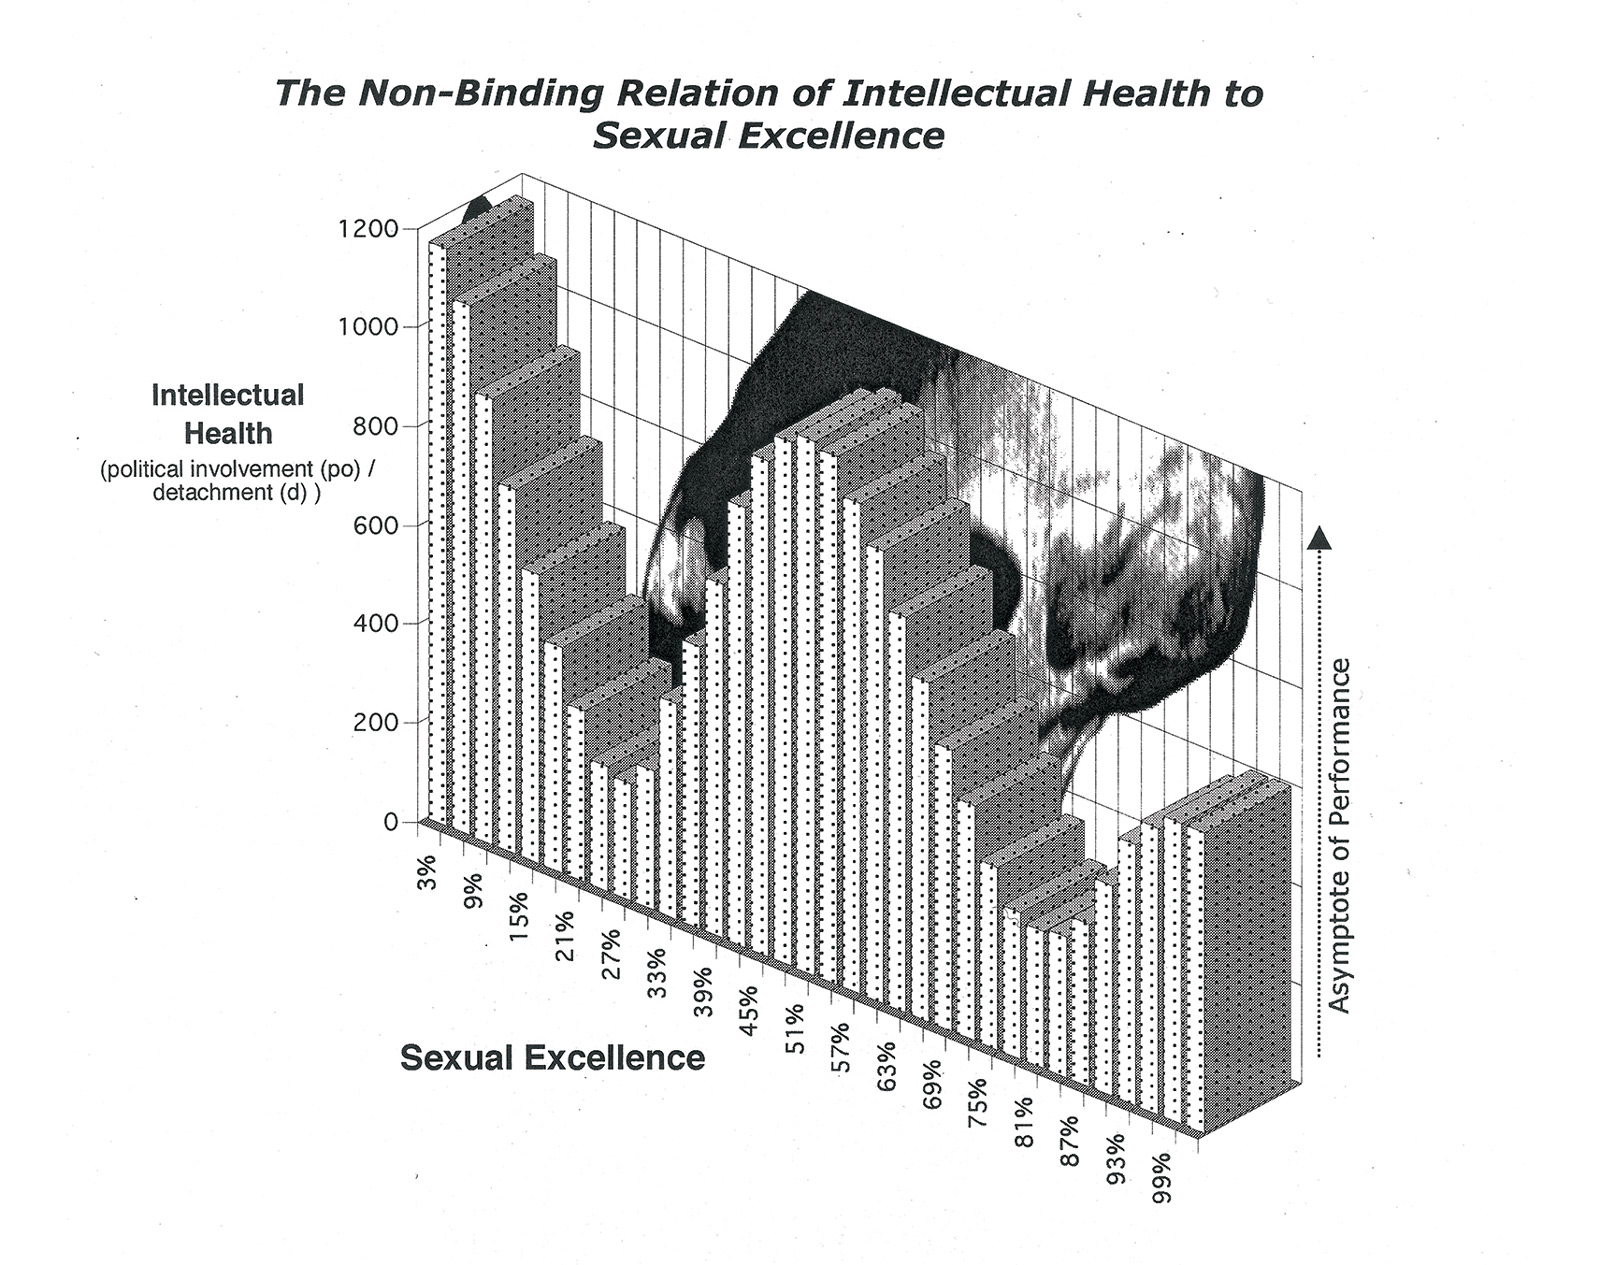 A 2000 postcard by artist Luke Murphy entitled “The Non-binding Relation of Intellectual Health to Sexual Excellence.”